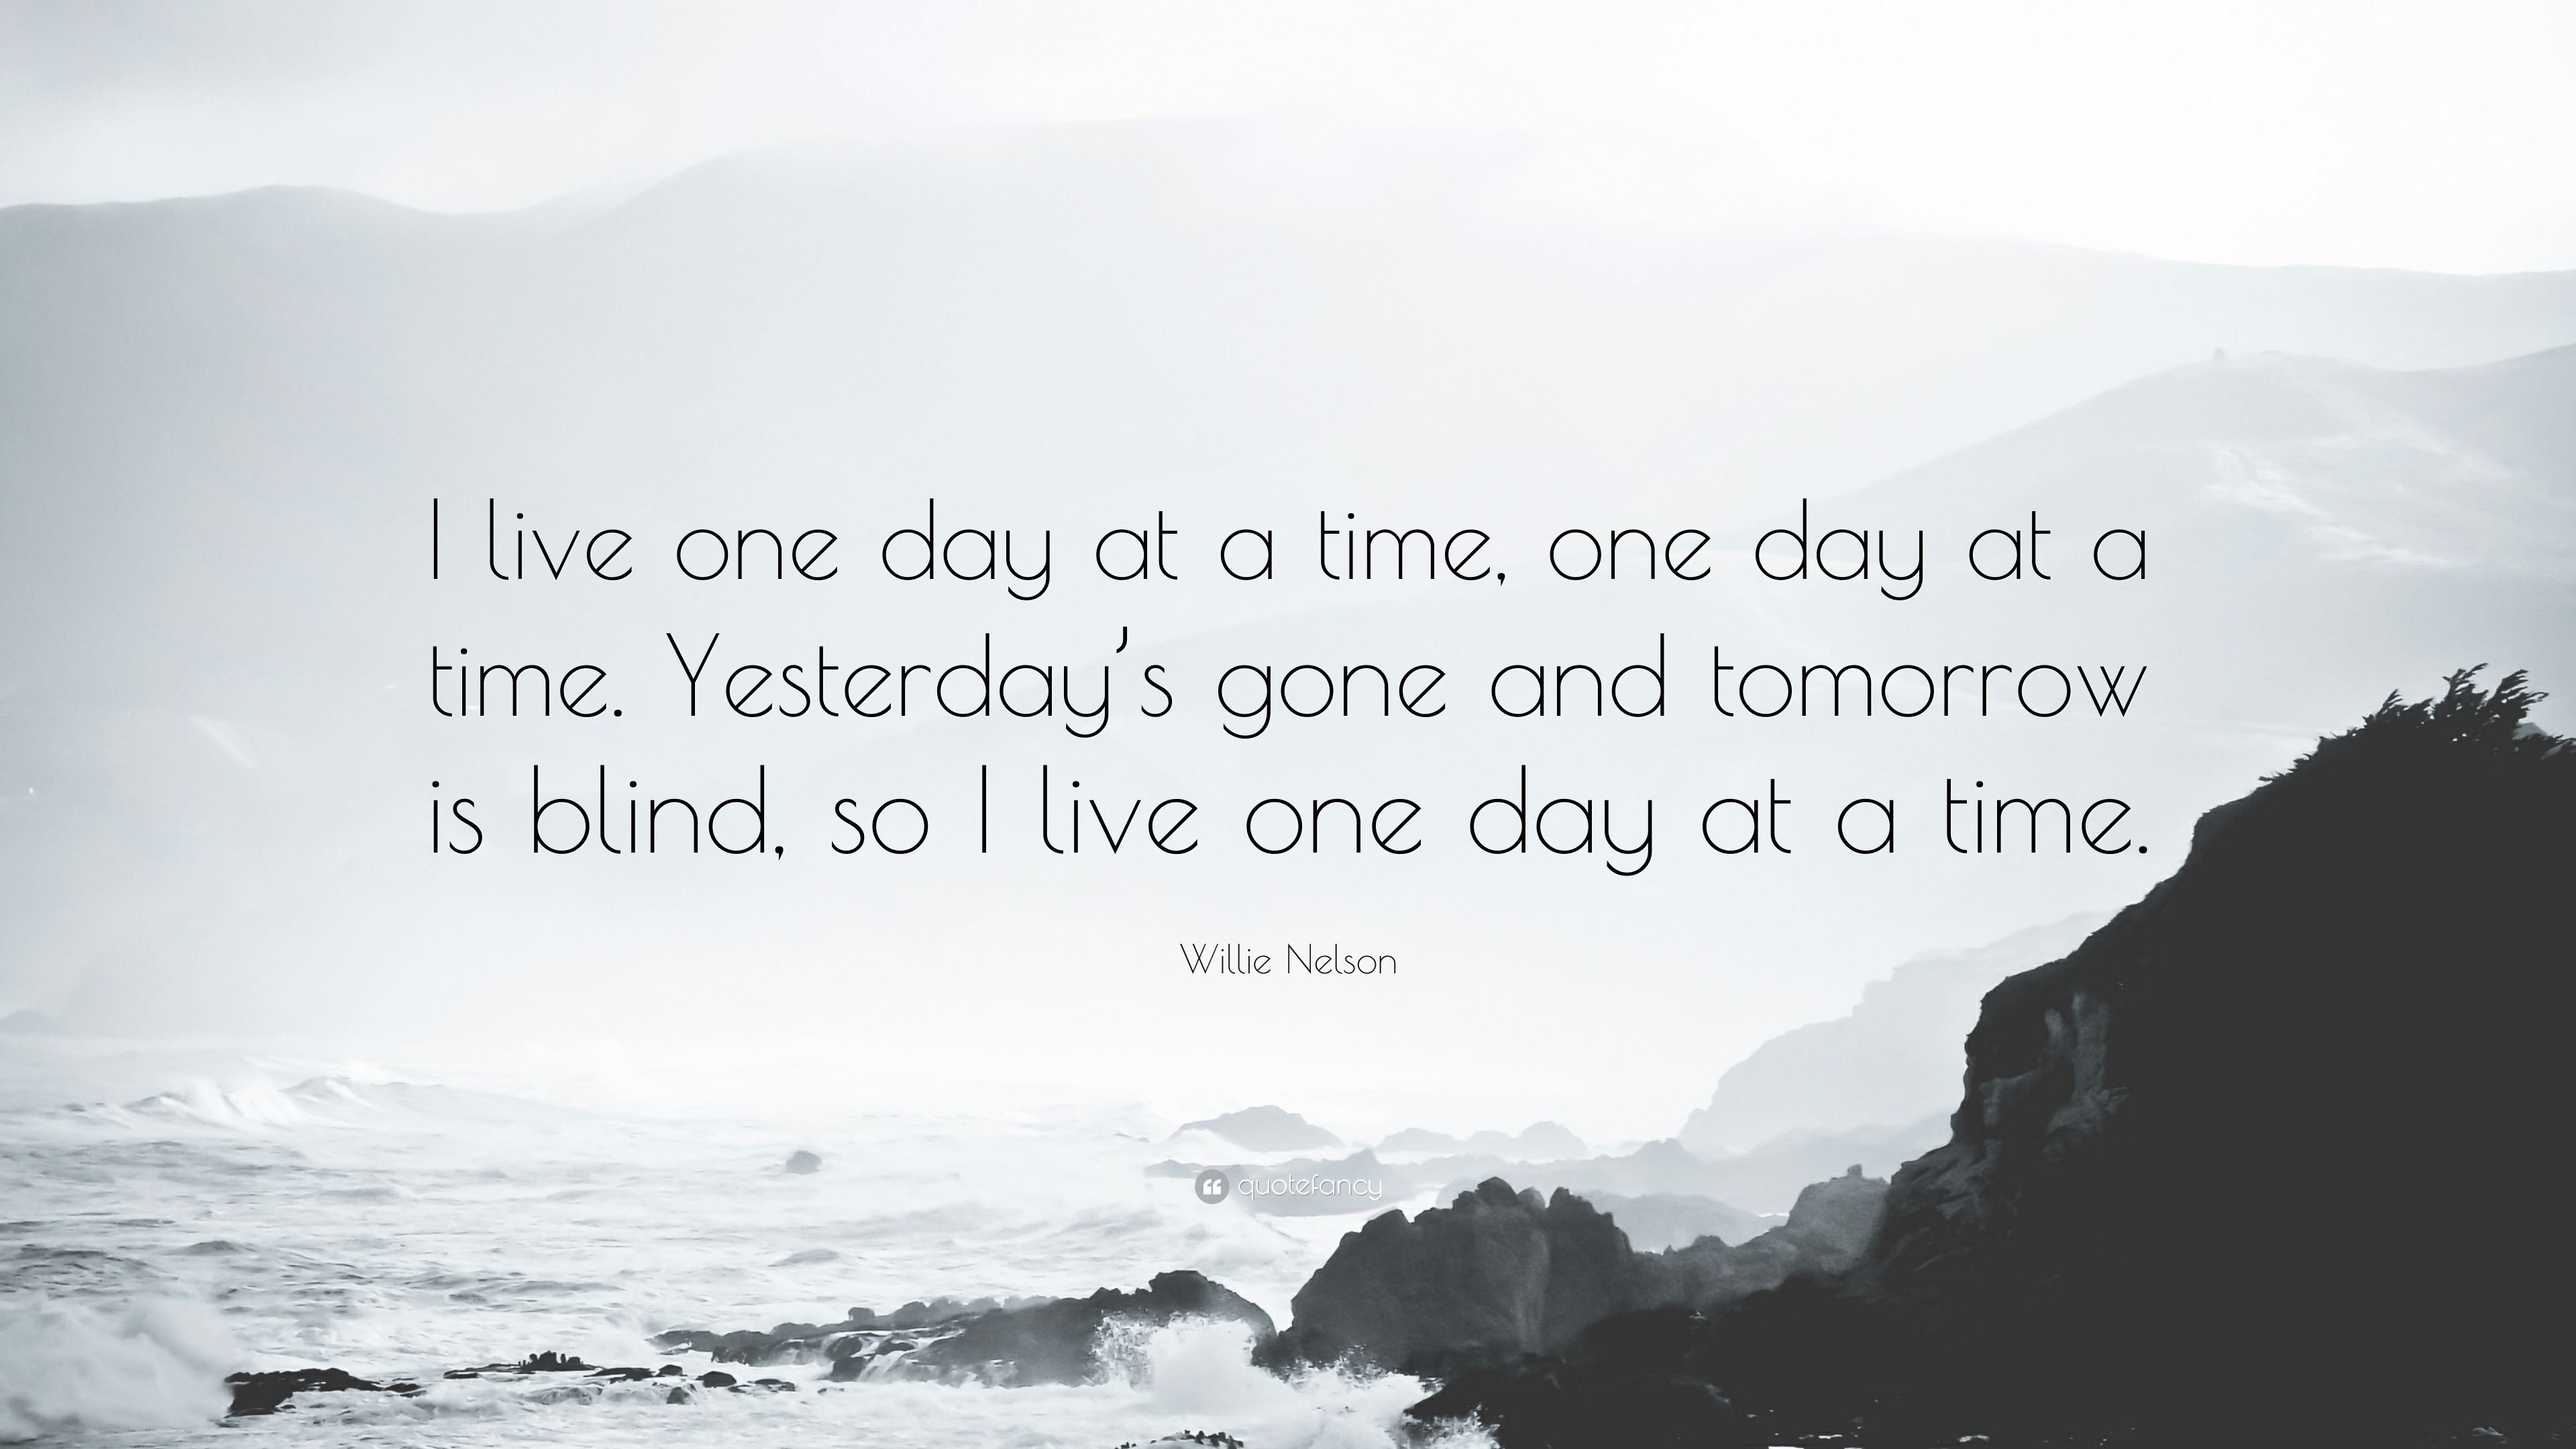 Willie Nelson Quote: “I live one day at a time, one day at a time.  Yesterday's